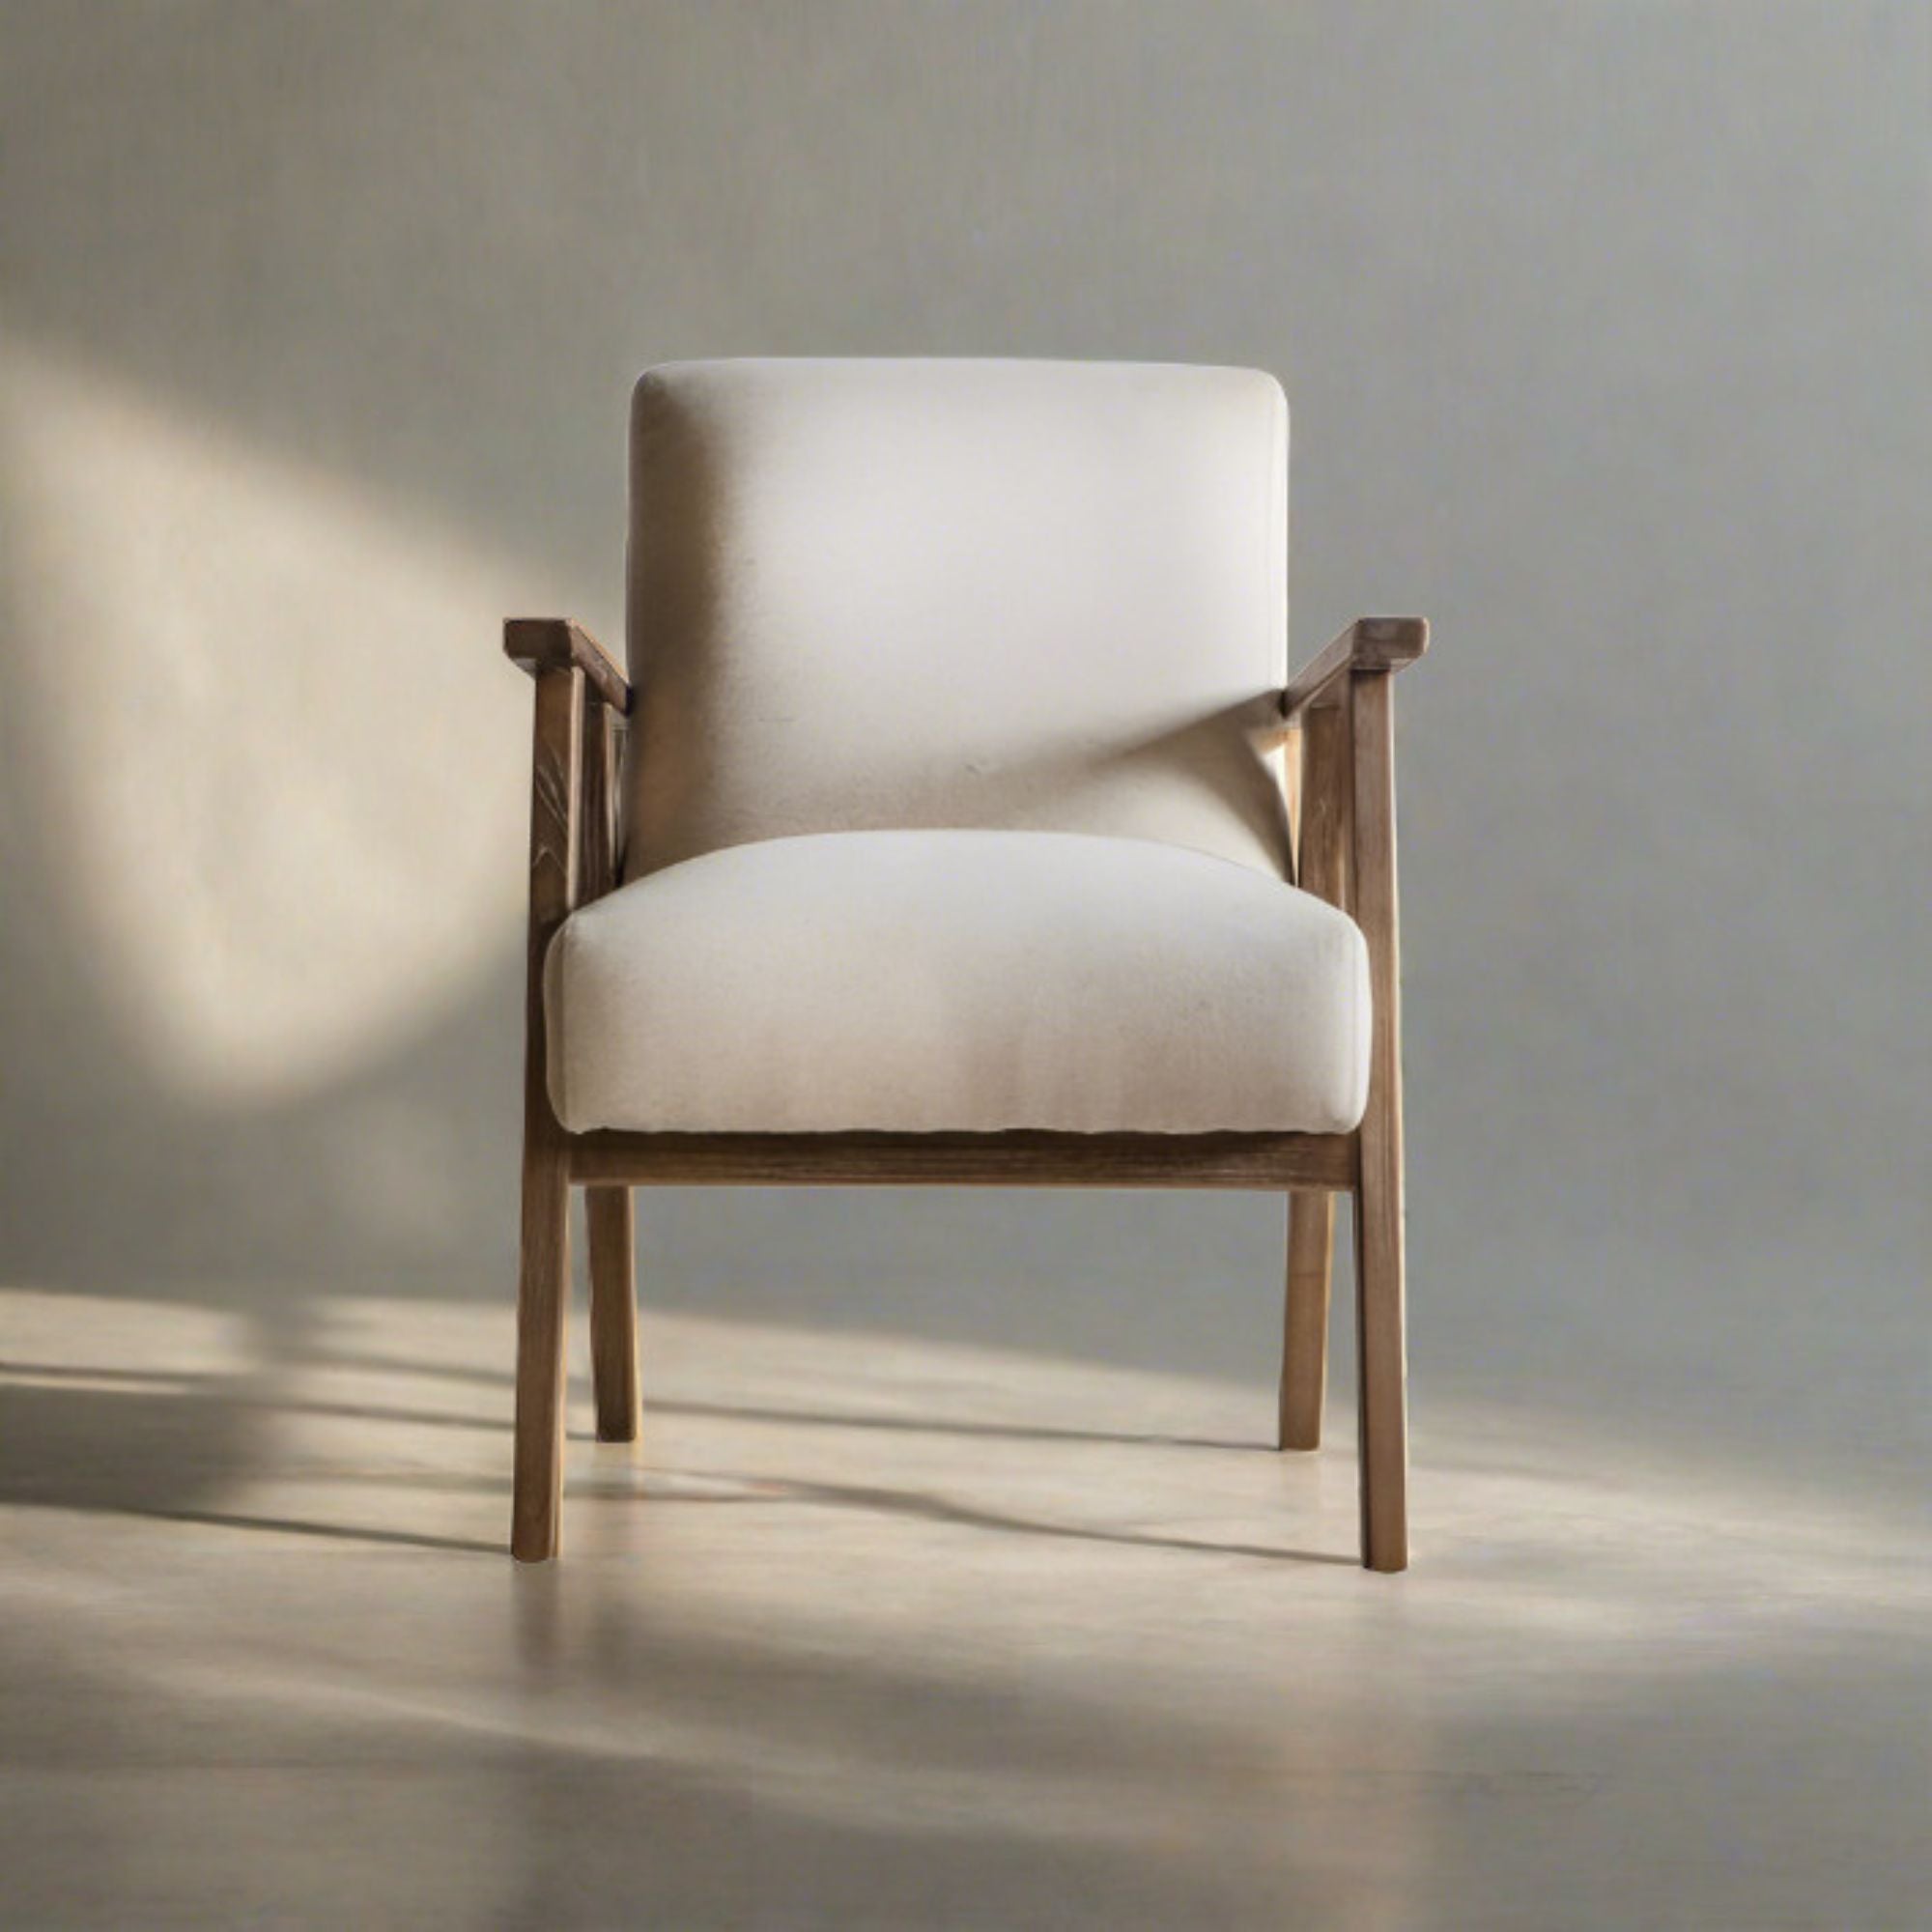 Barret mid century style armchair in natural linen upholstery and solid ash wood frame | MalletandPlane.com